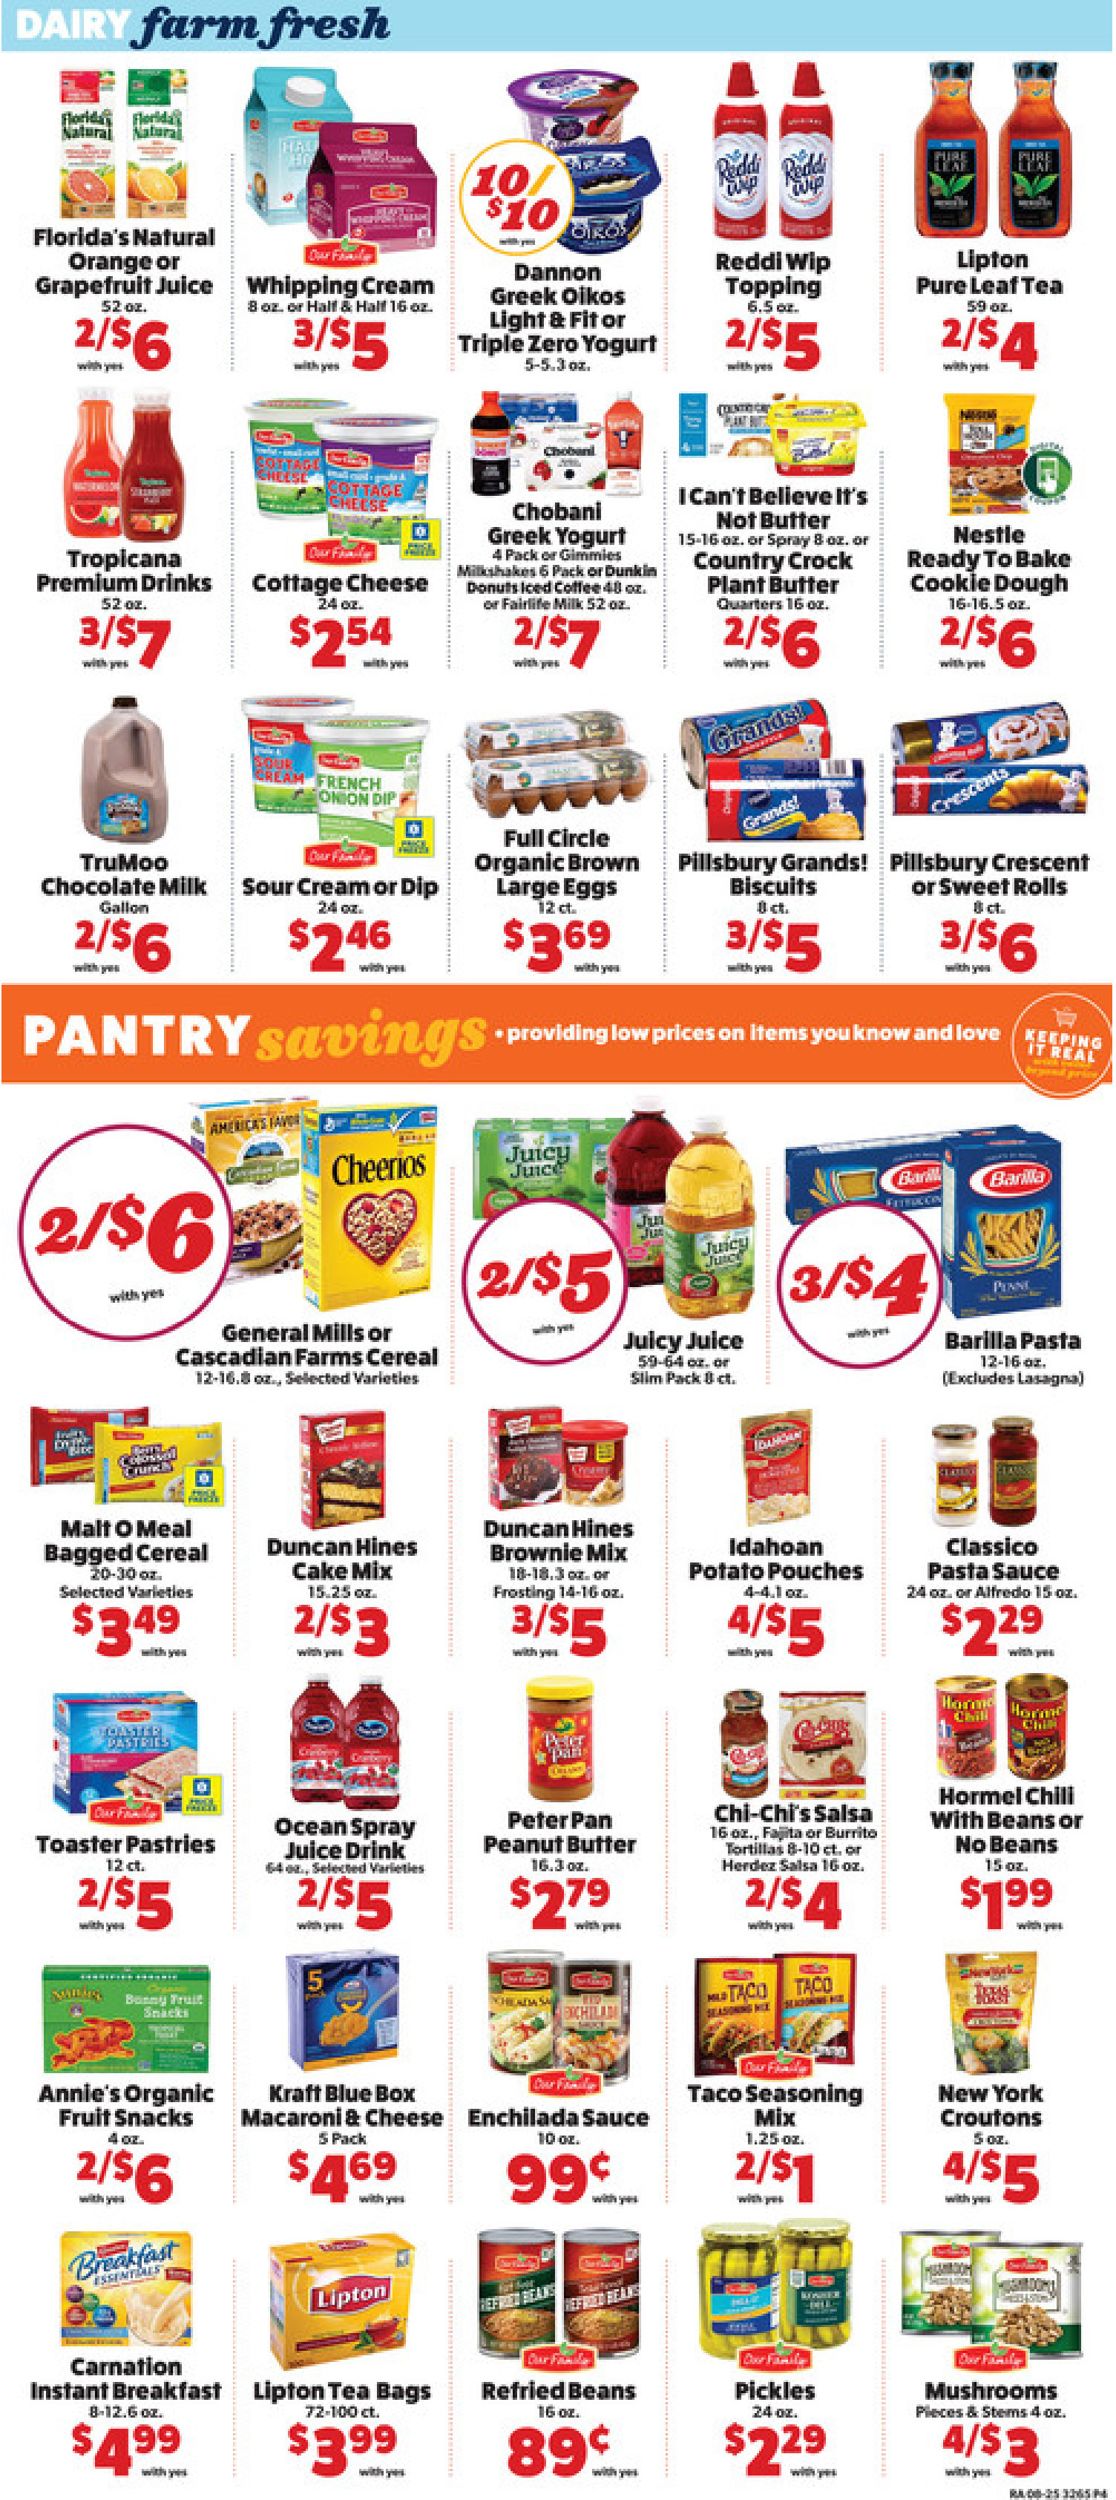 Family Fare Current weekly ad 08/28 - 09/03/2019 [6] - frequent-ads.com